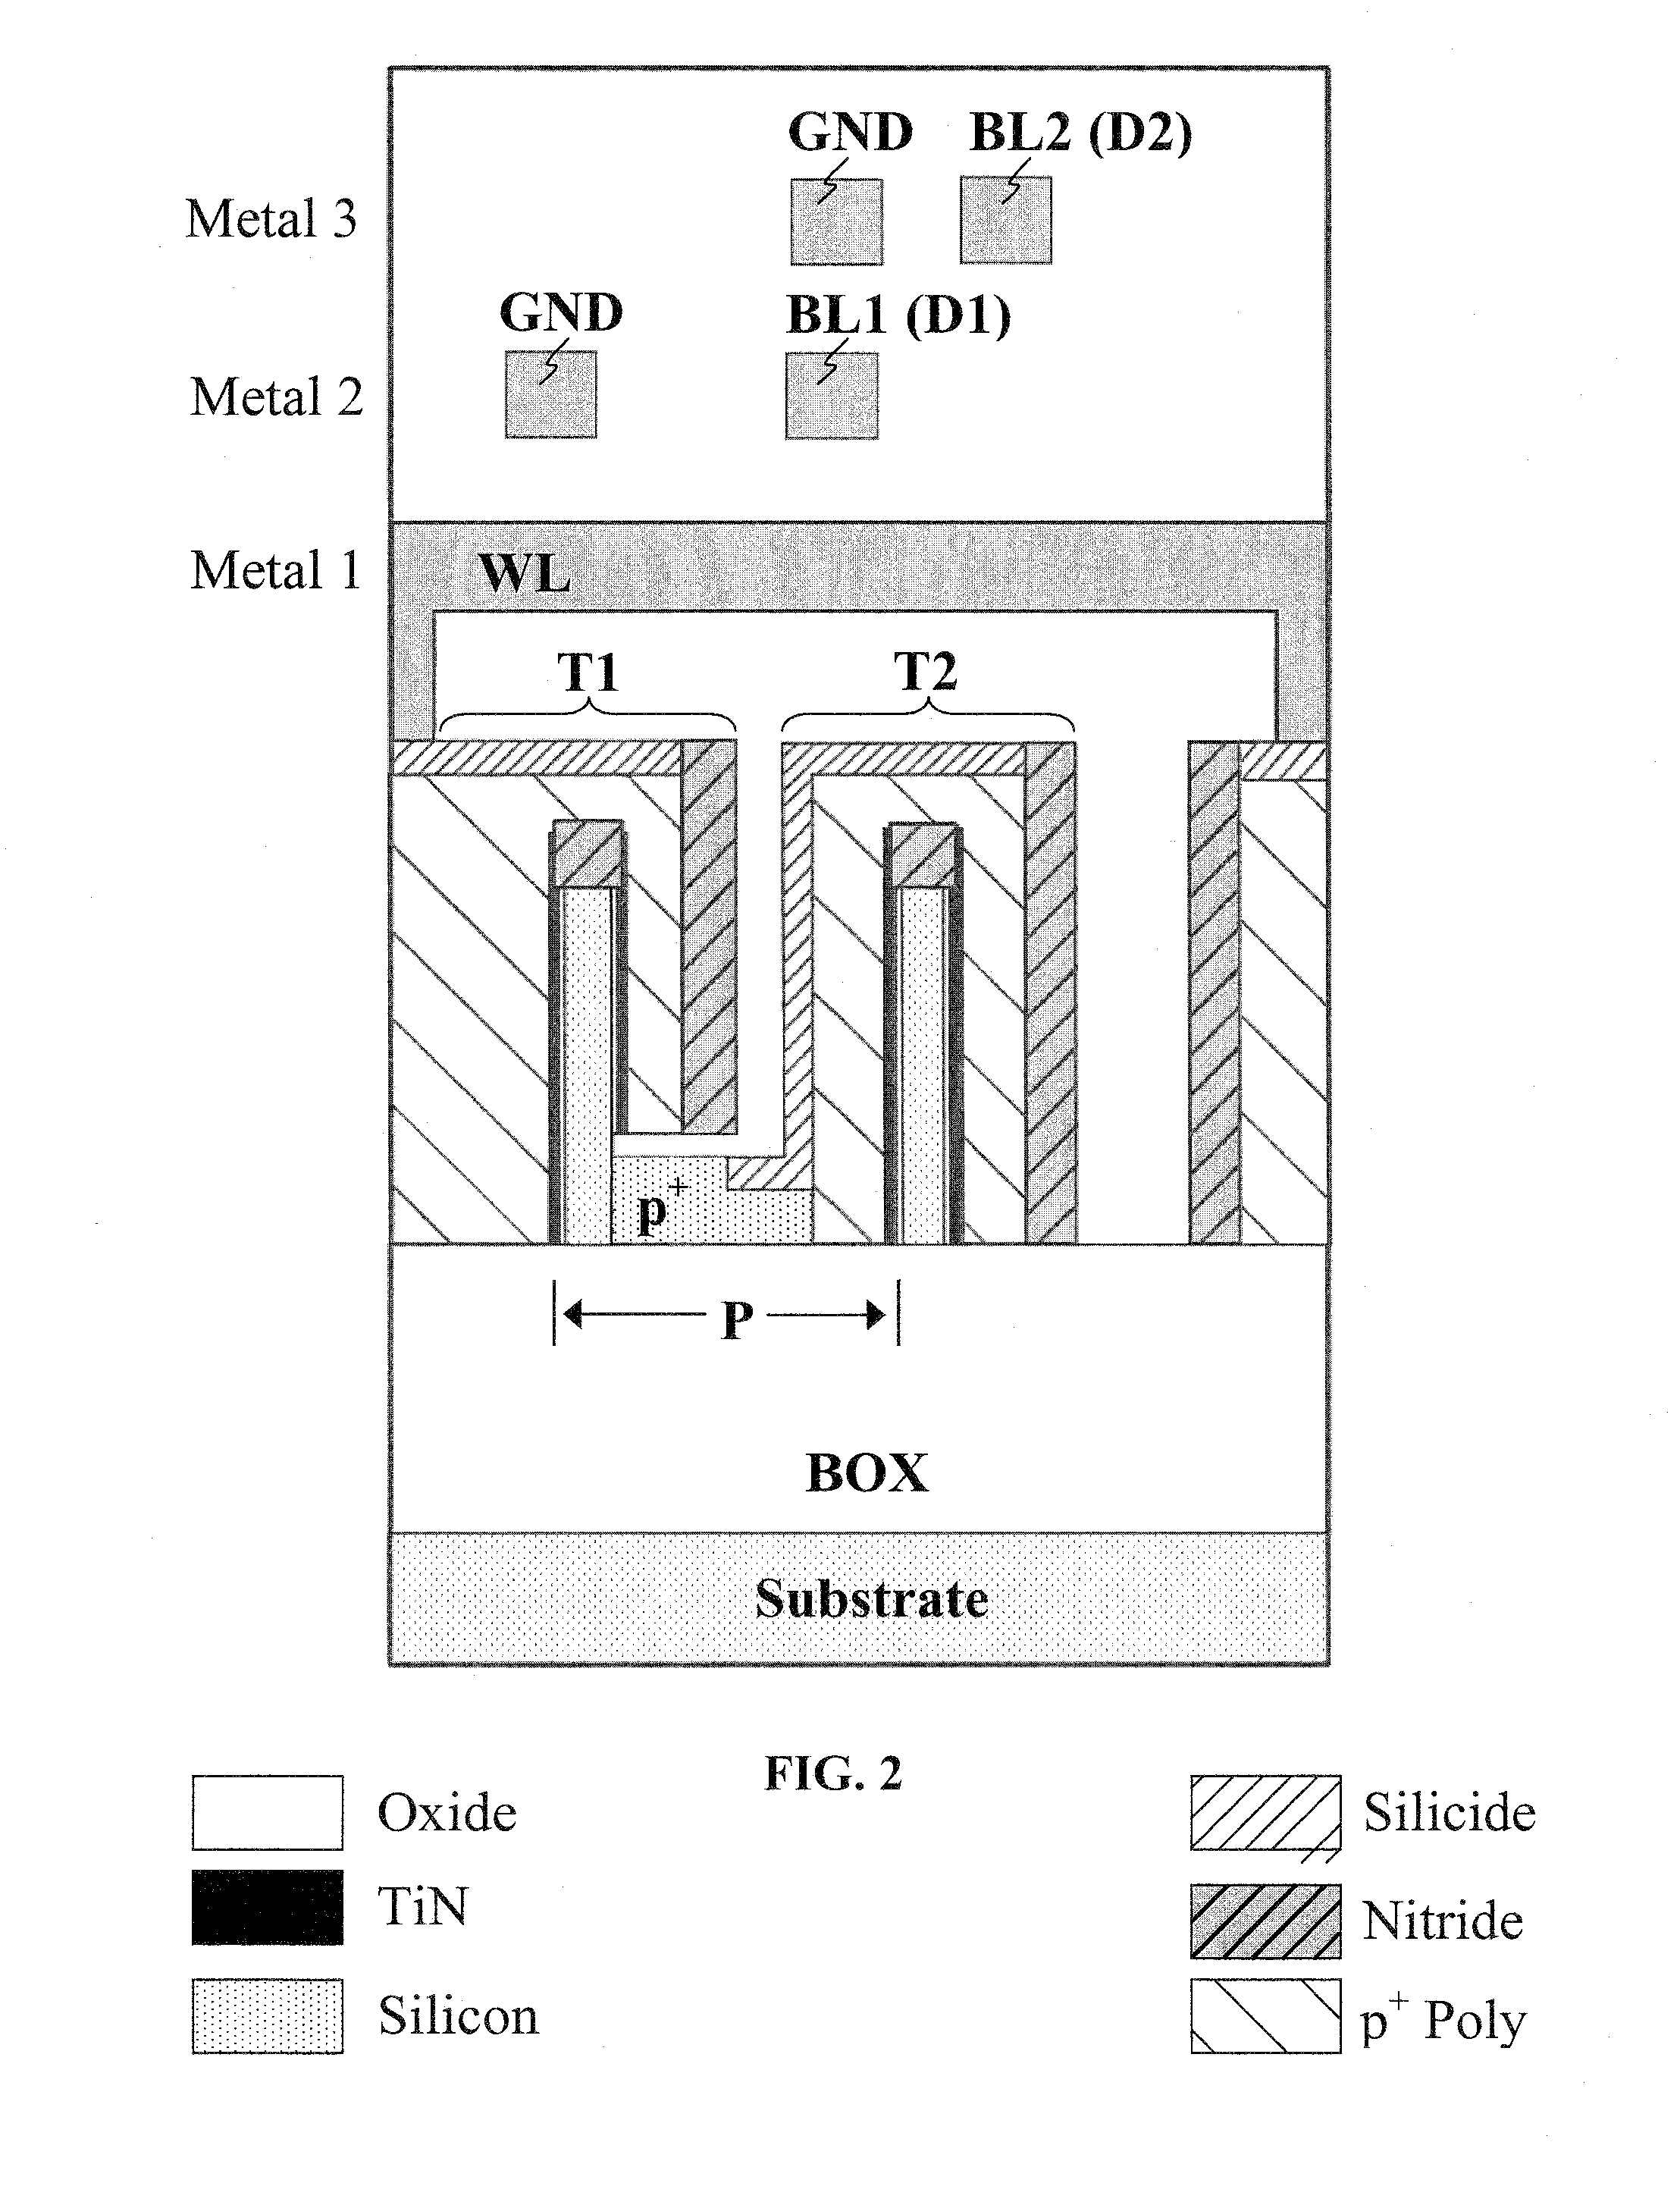 Two-Transistor Floating-Body Dynamic Memory Cell